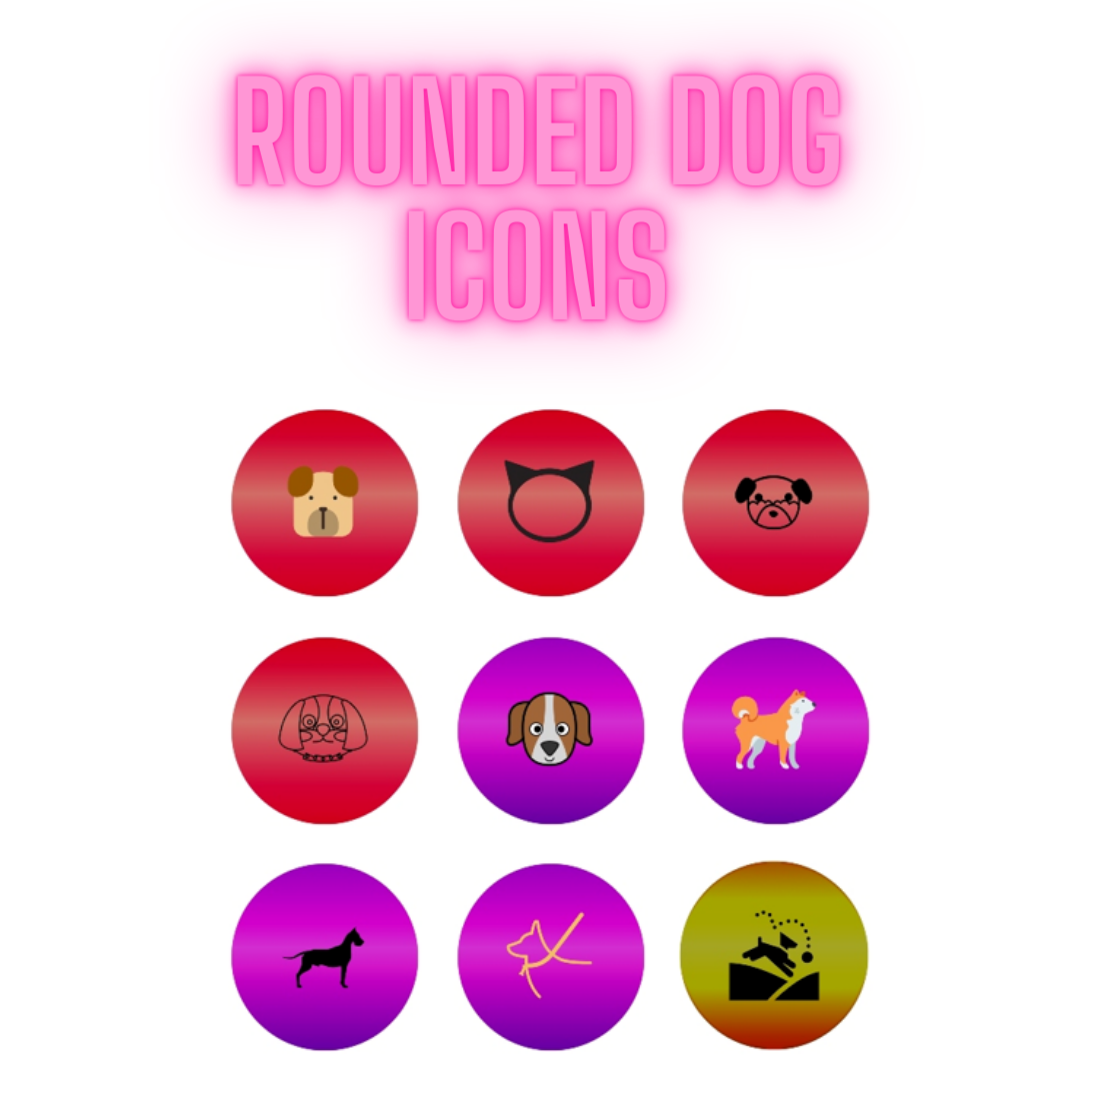 copy of rounded dog icons